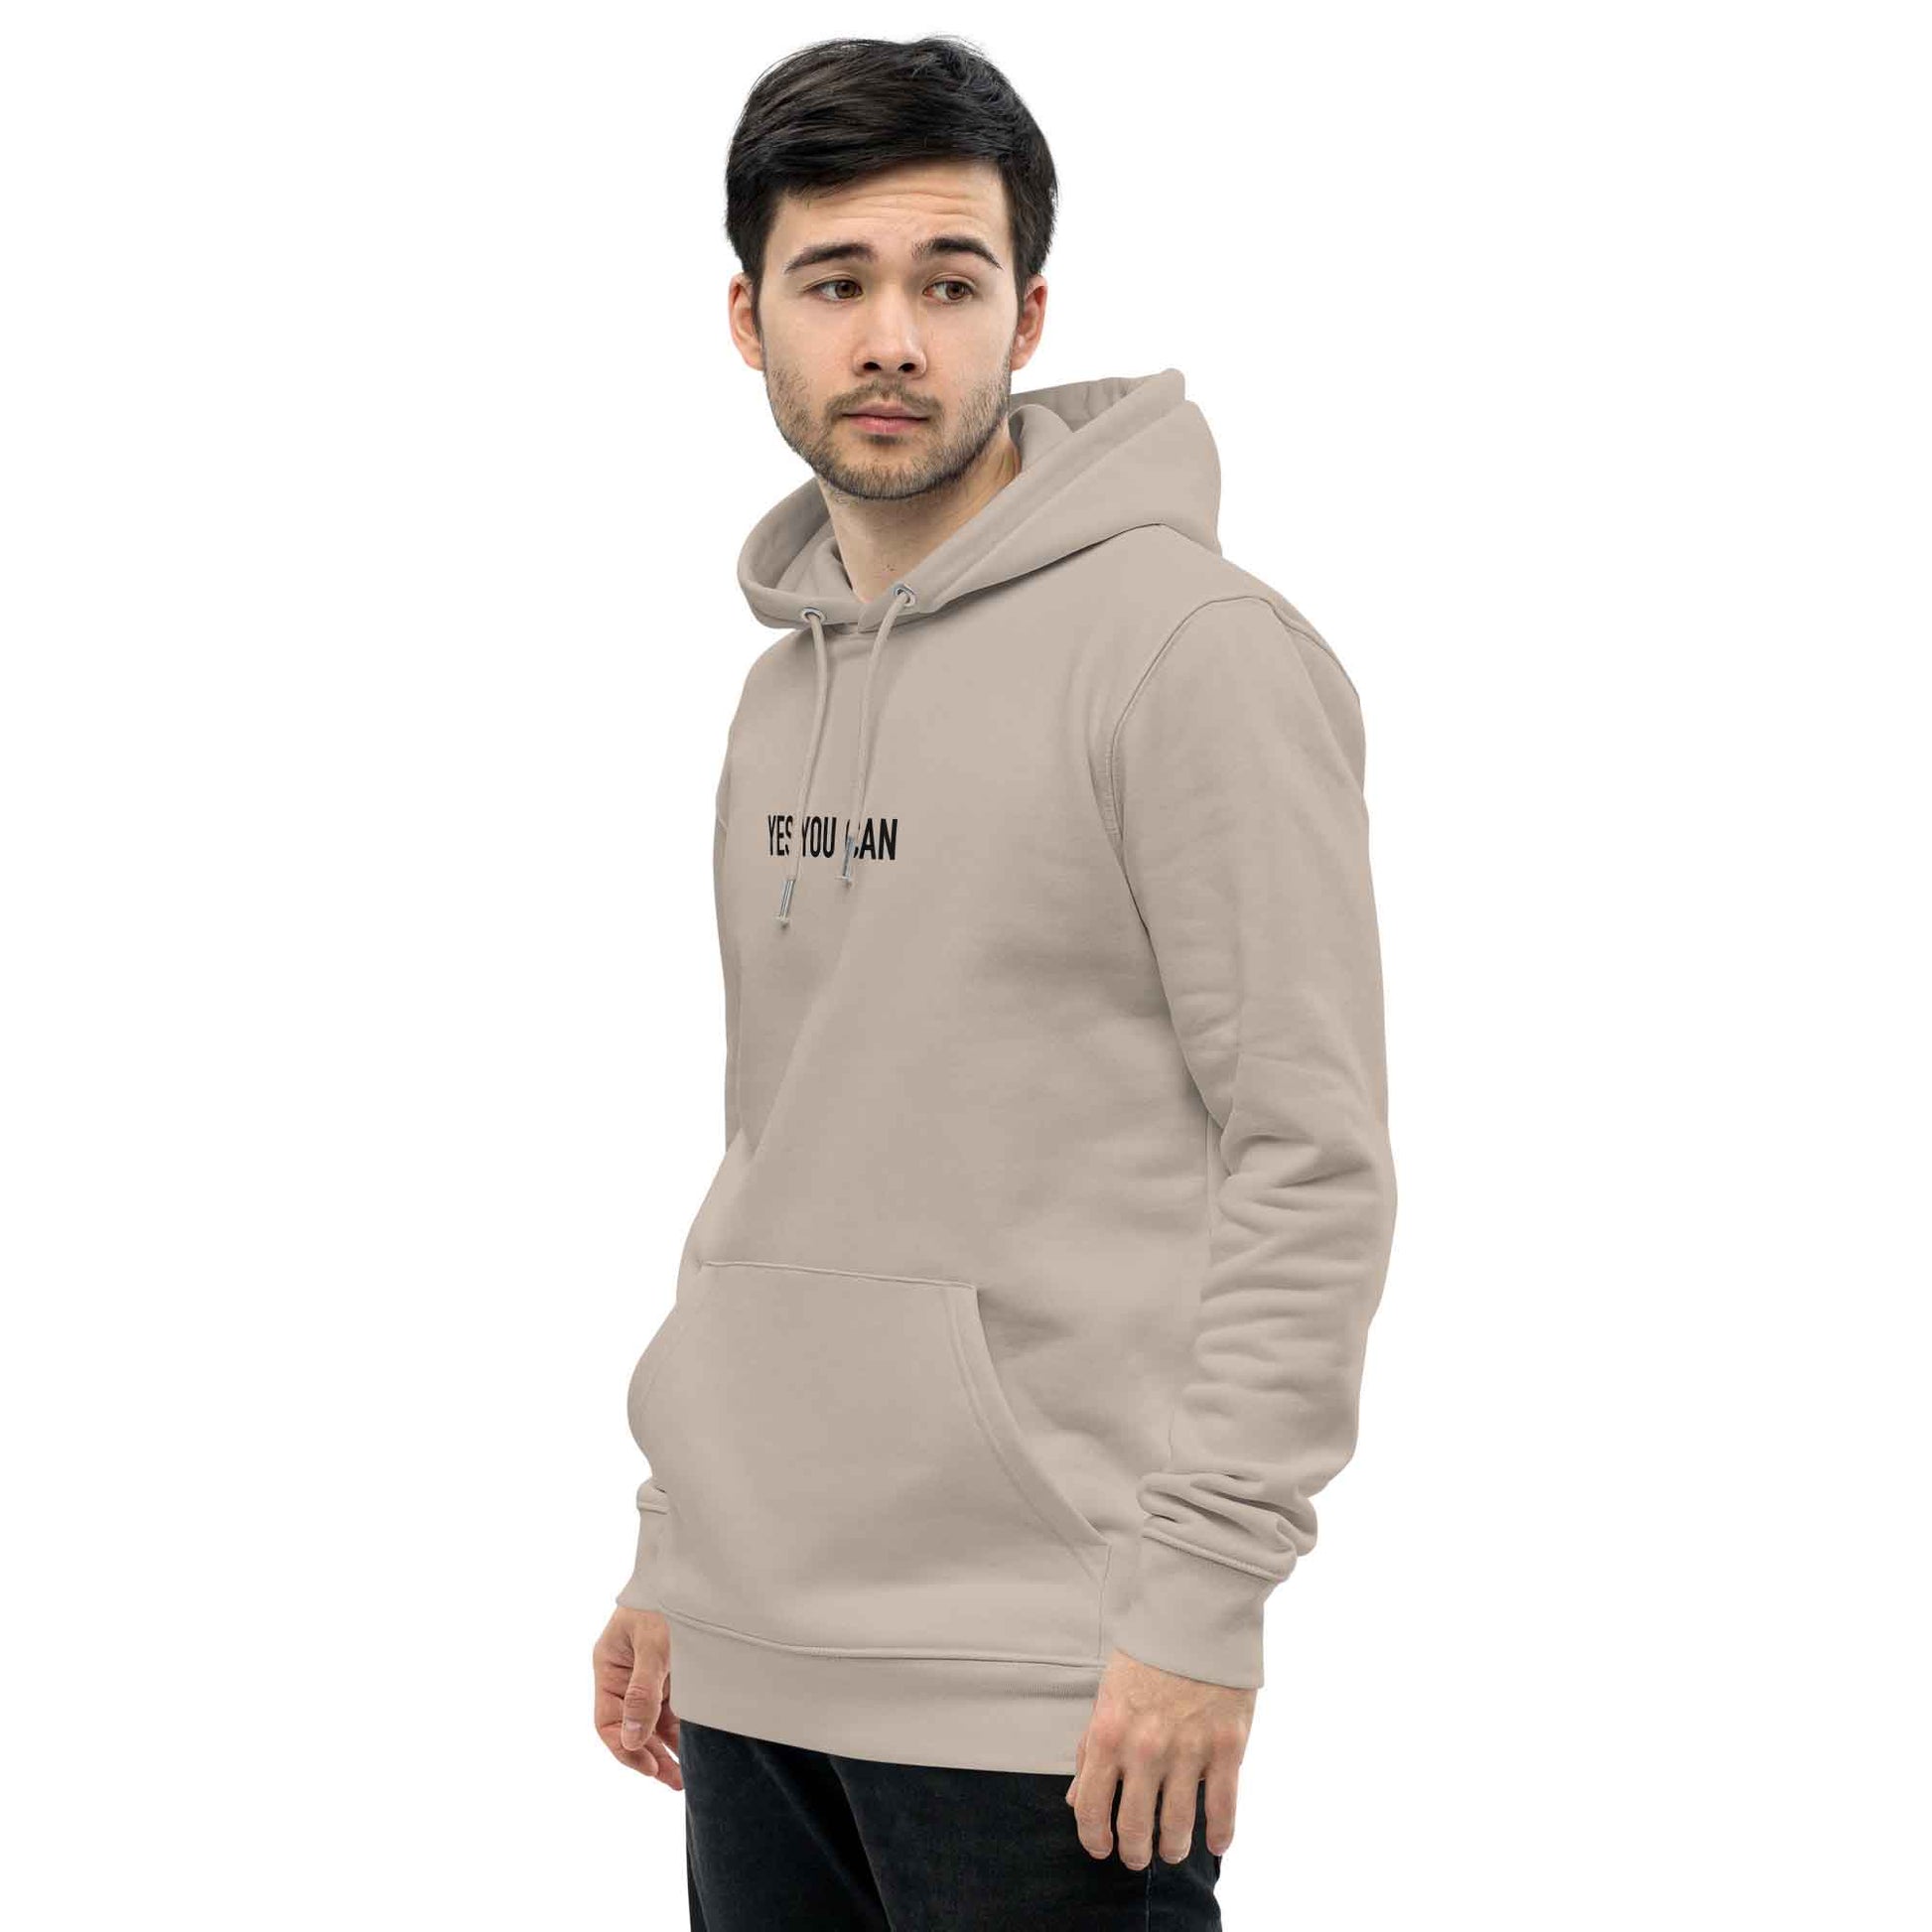 Men beige organic cotton hoodie with inspirational quote, "Yes You Can."